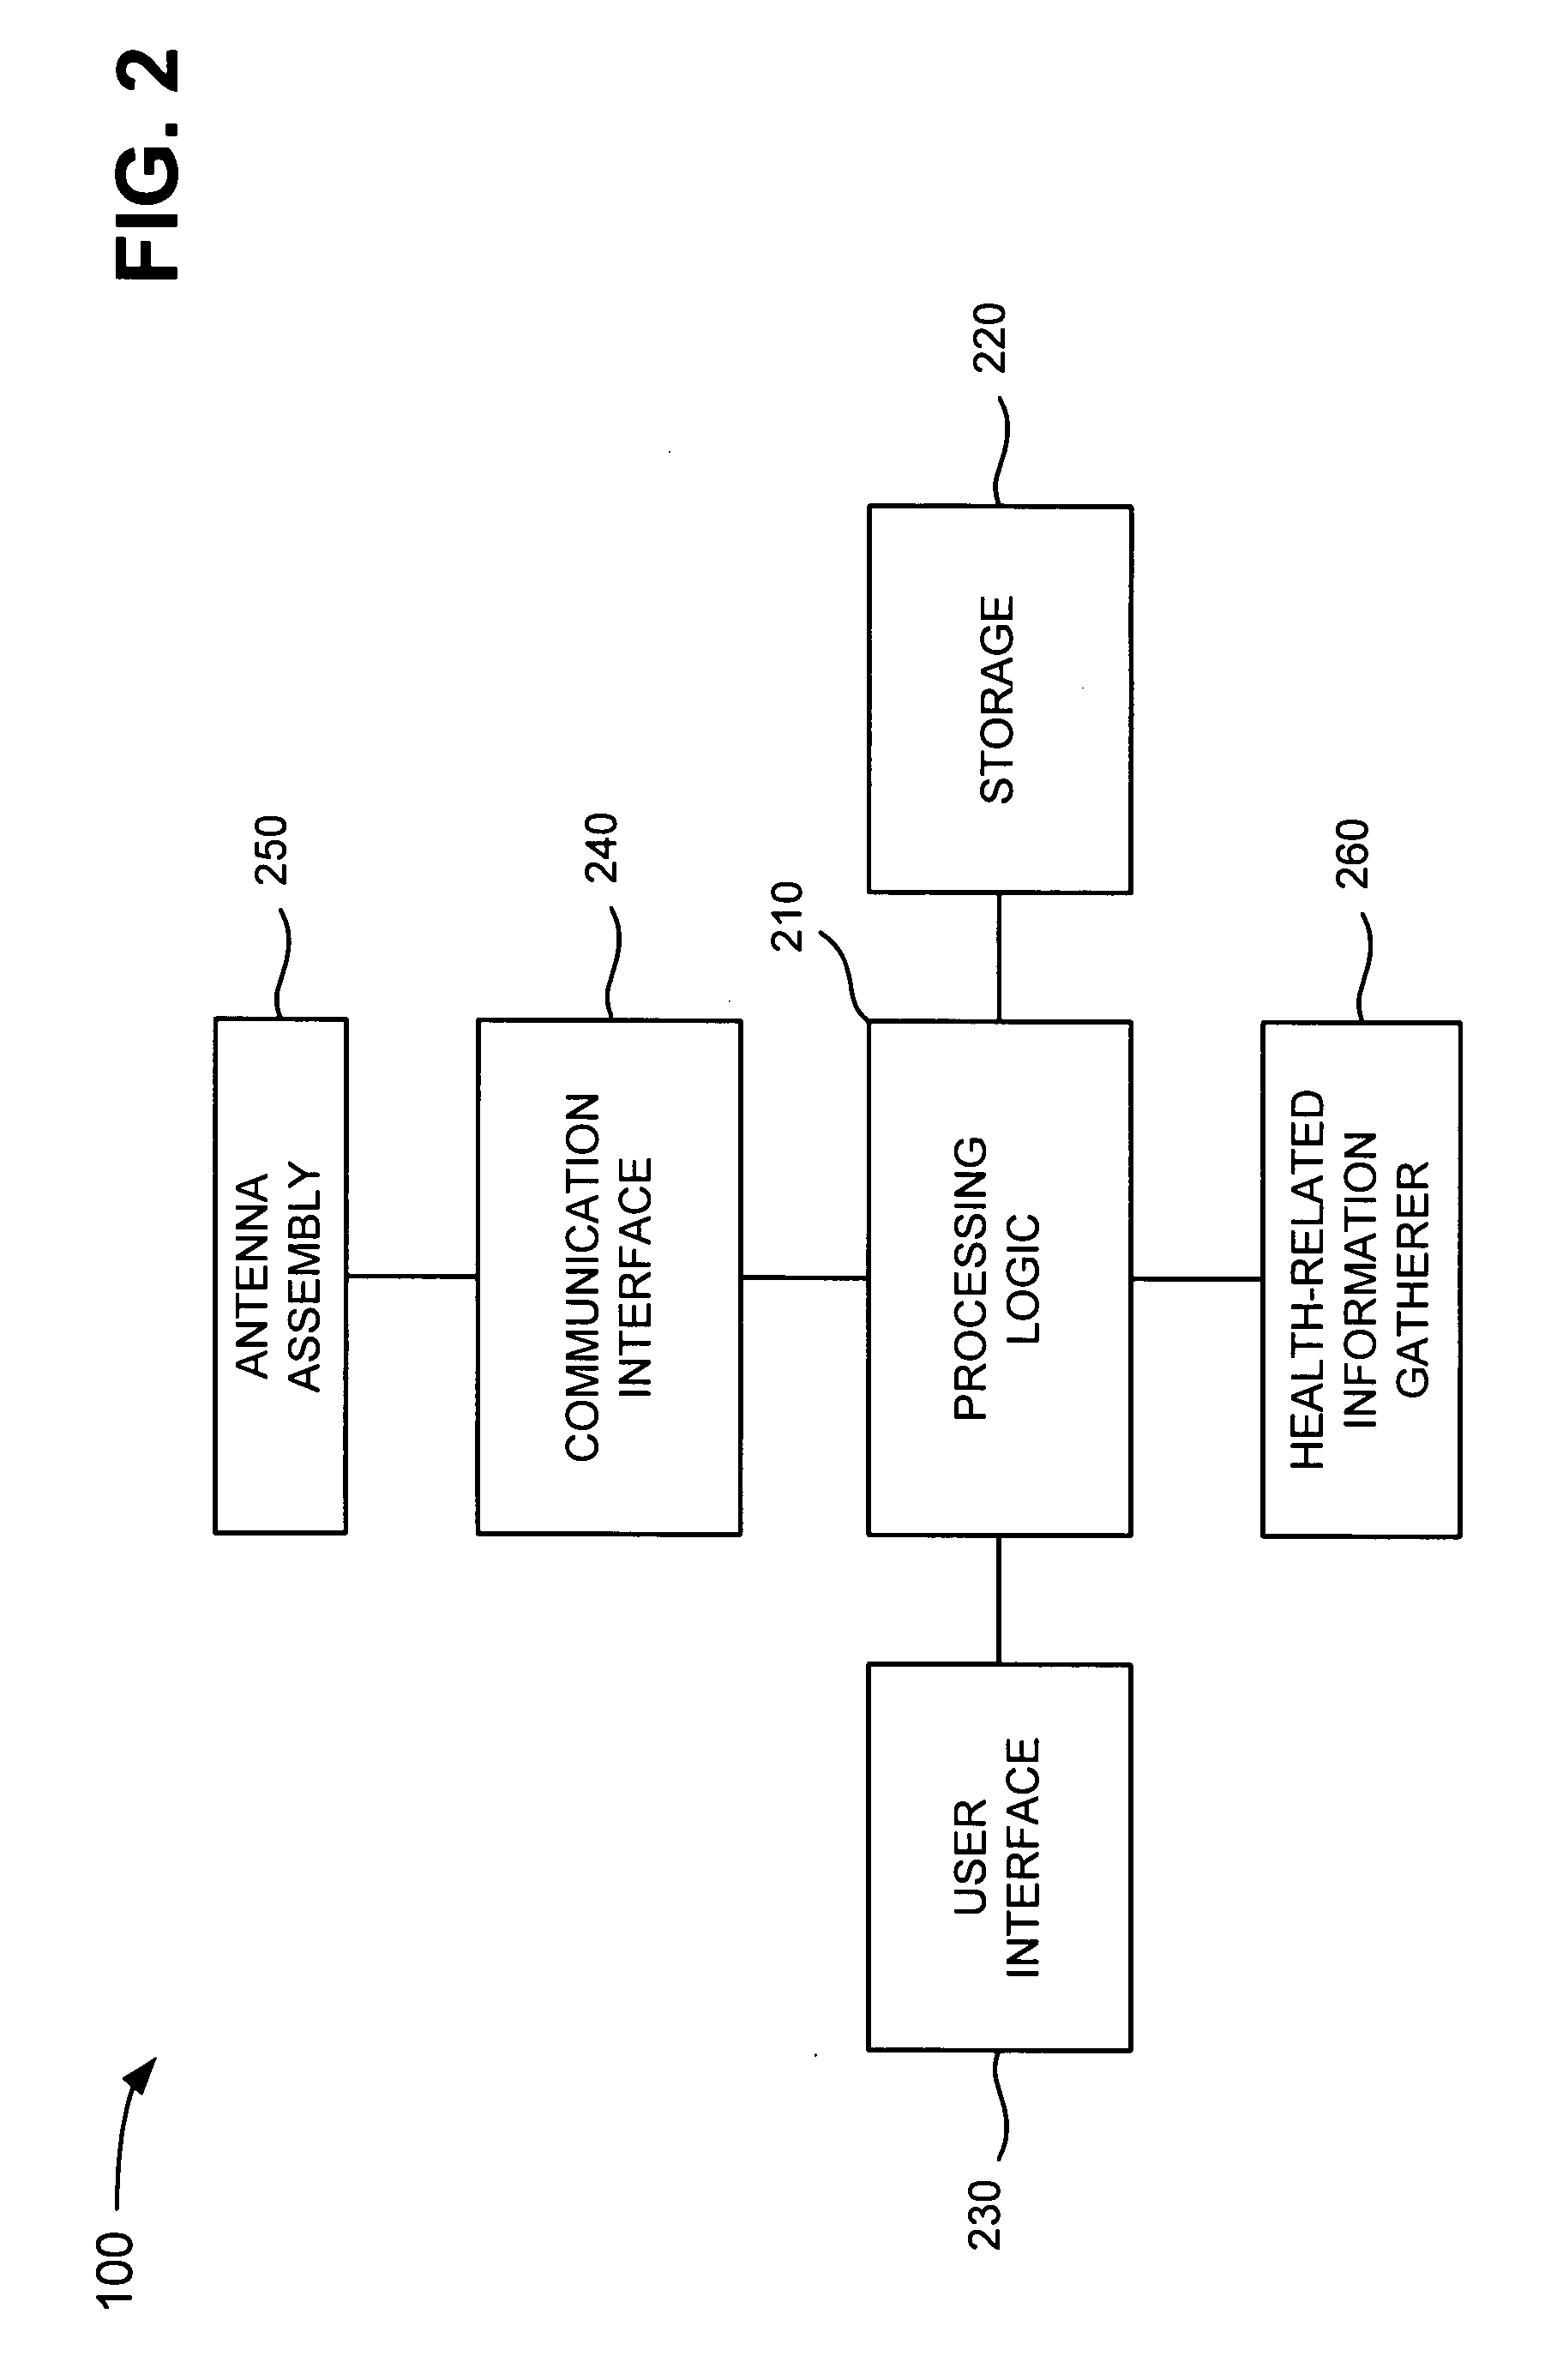 Mobile communication device that provides health feedback